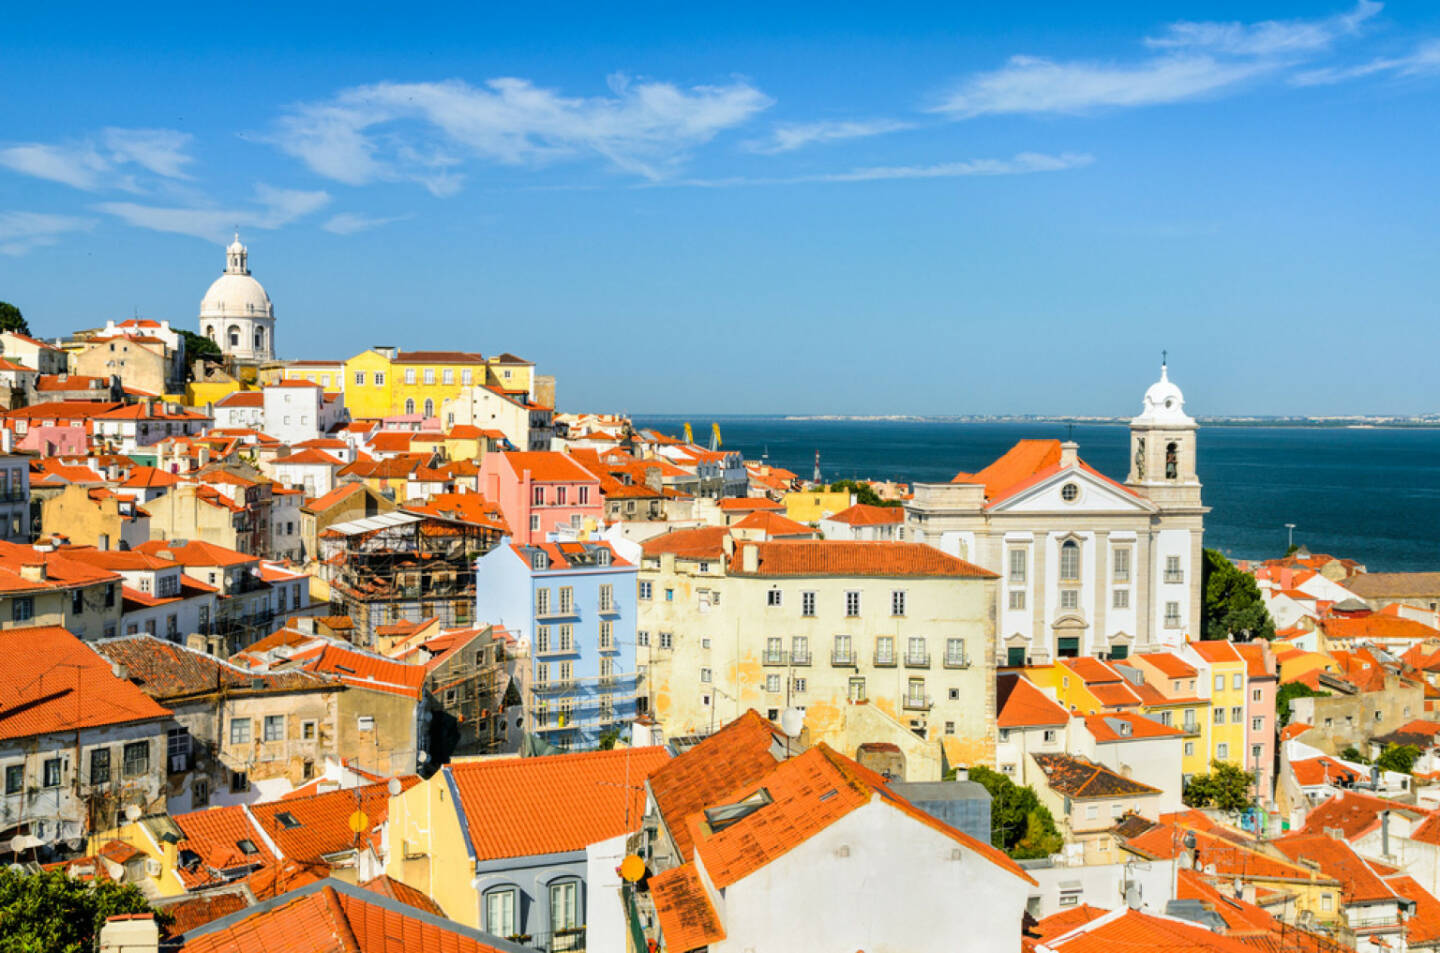 Lissabon, Portugal, http://www.shutterstock.com/de/pic-147297848/stock-photo-a-view-of-the-alfama-downtown-in-lisbon-portugal.html 